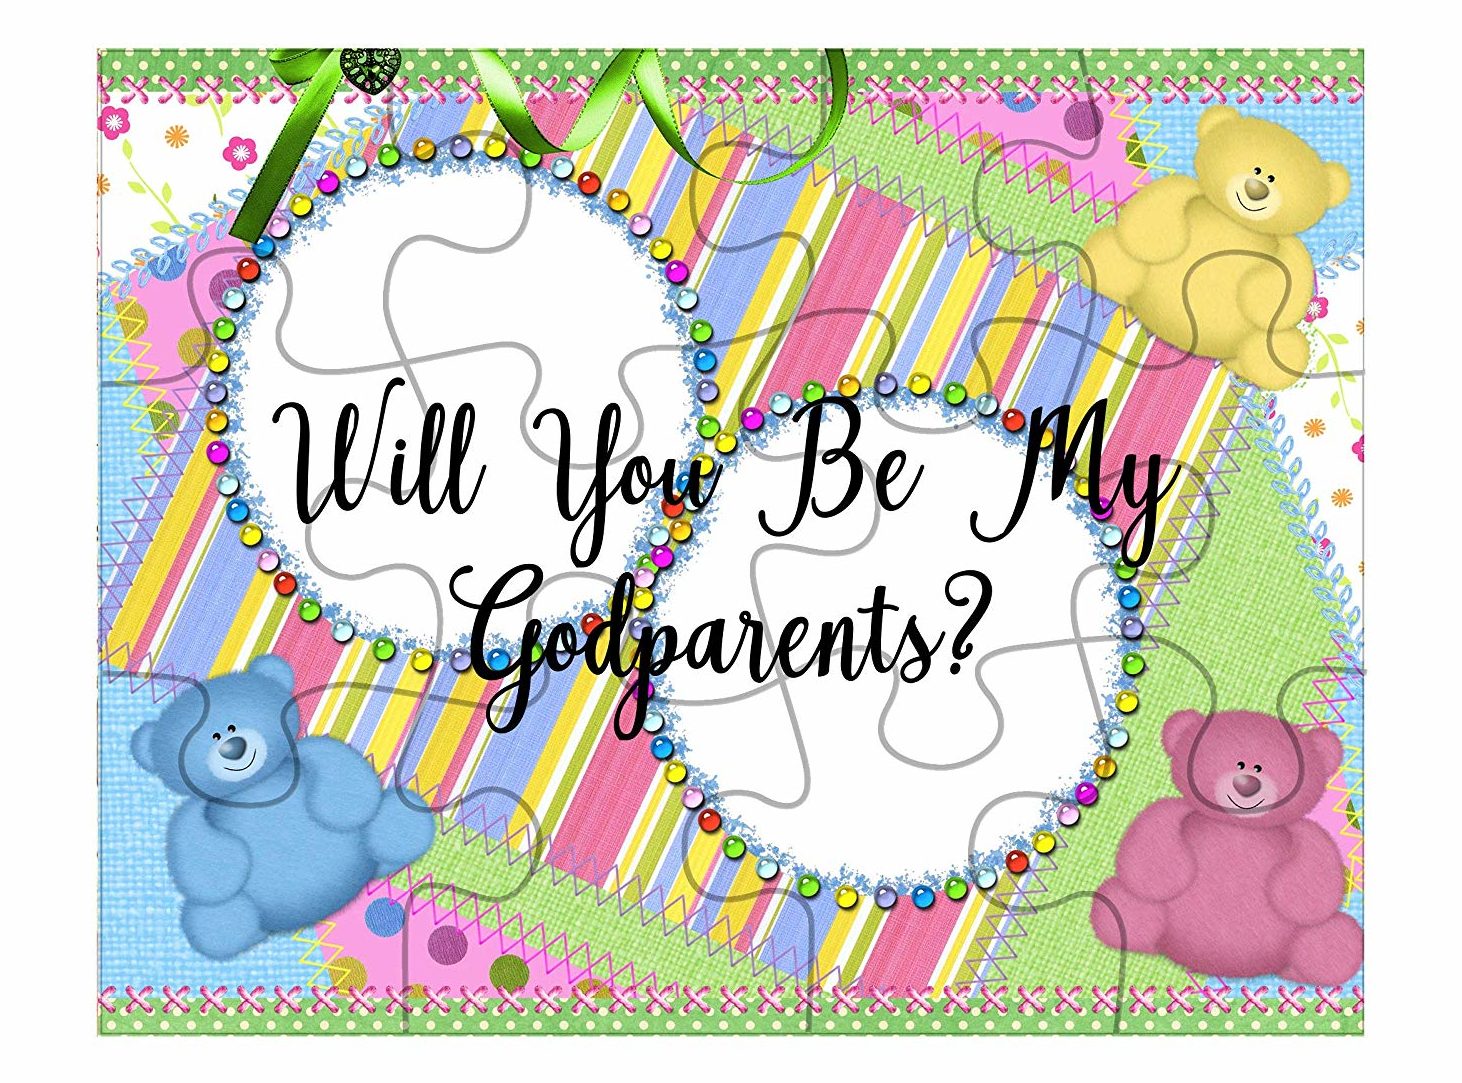 godparent proposal, creative proposal ideas, what are godparents, pinterest trends, will you be my godparents, how to ask godparents, will you be my godfather gifts, asking someone to be a godparent, creative ways to ask godparents, poem for godmothers